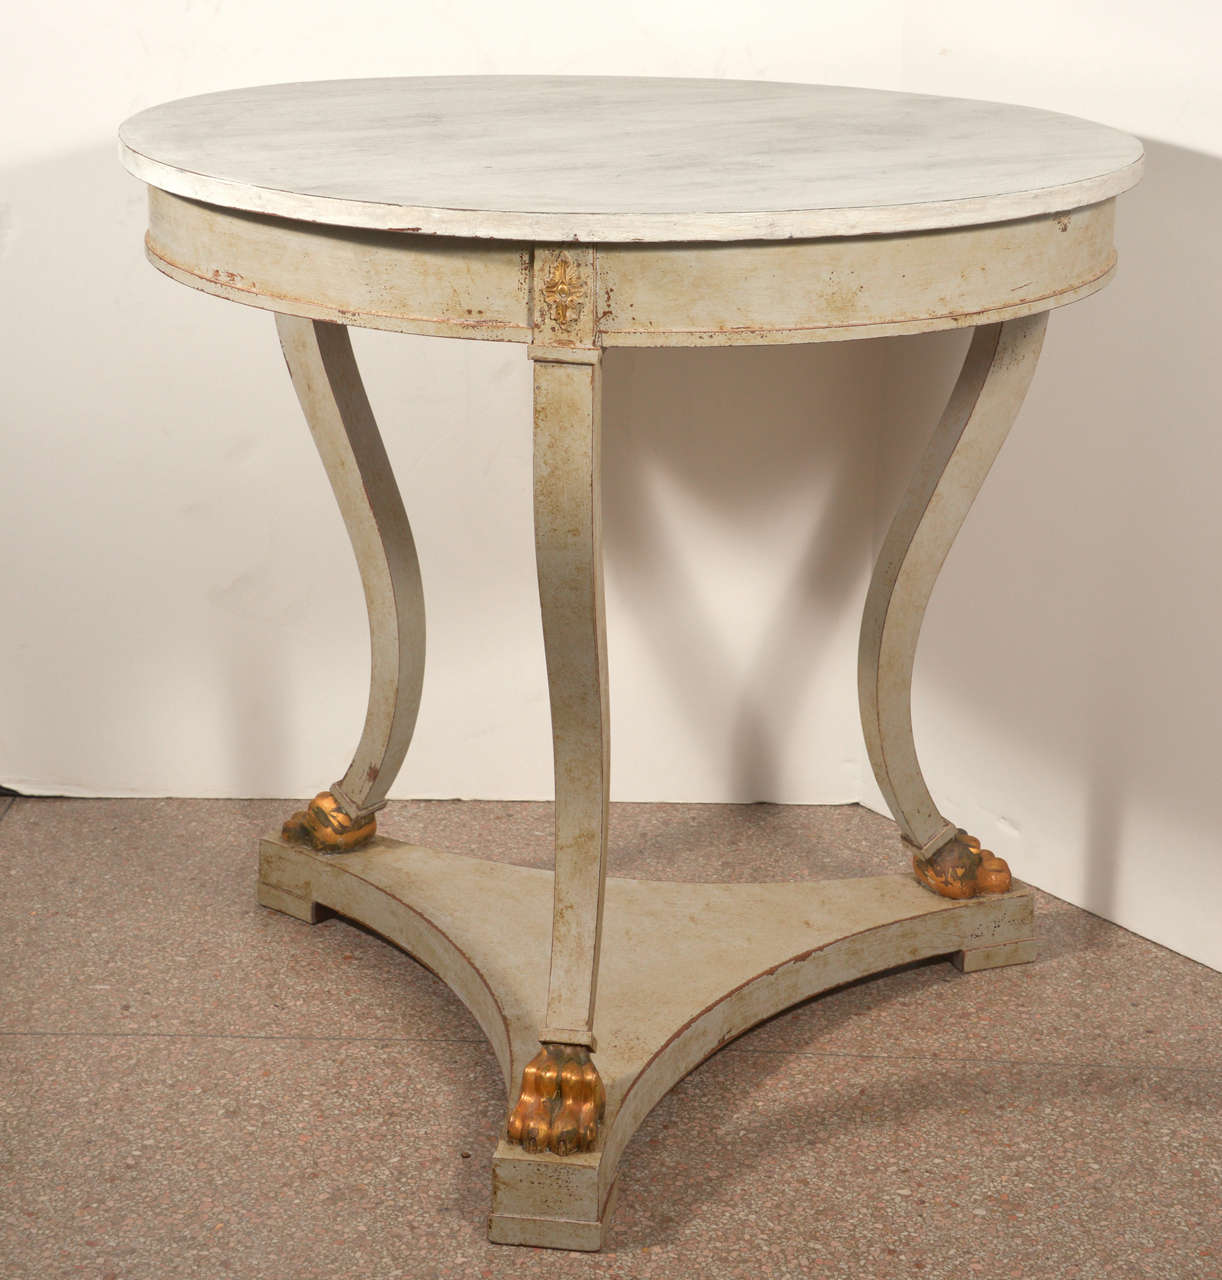 Center Table with Graceful Legs on a Footed Platform
Beautiful Gilt Details